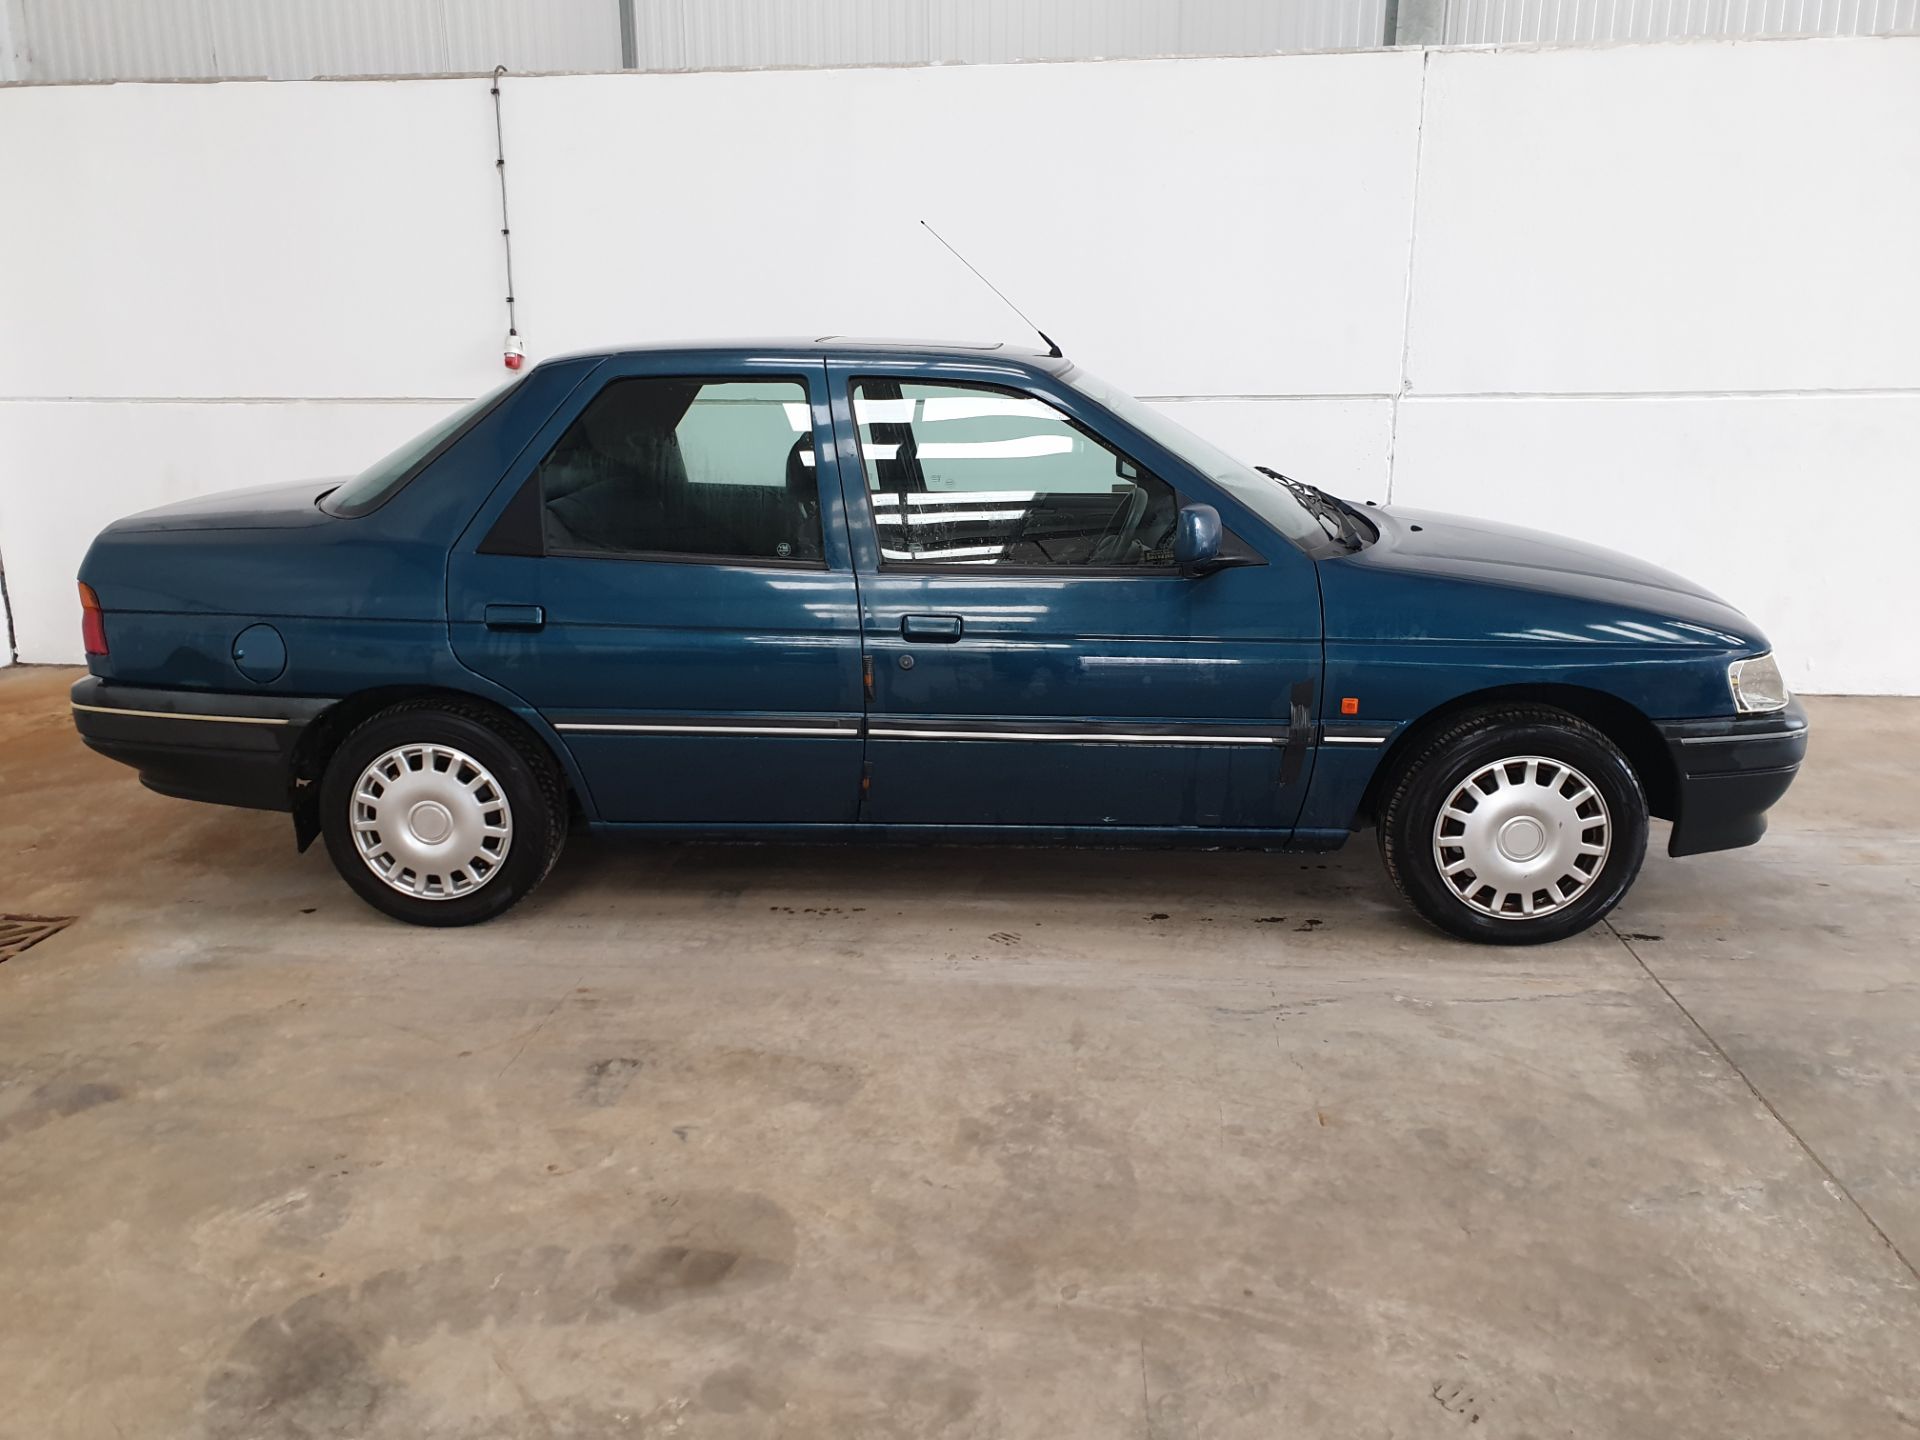 1995 / M Ford Escort LXi Saloon - Image 3 of 8